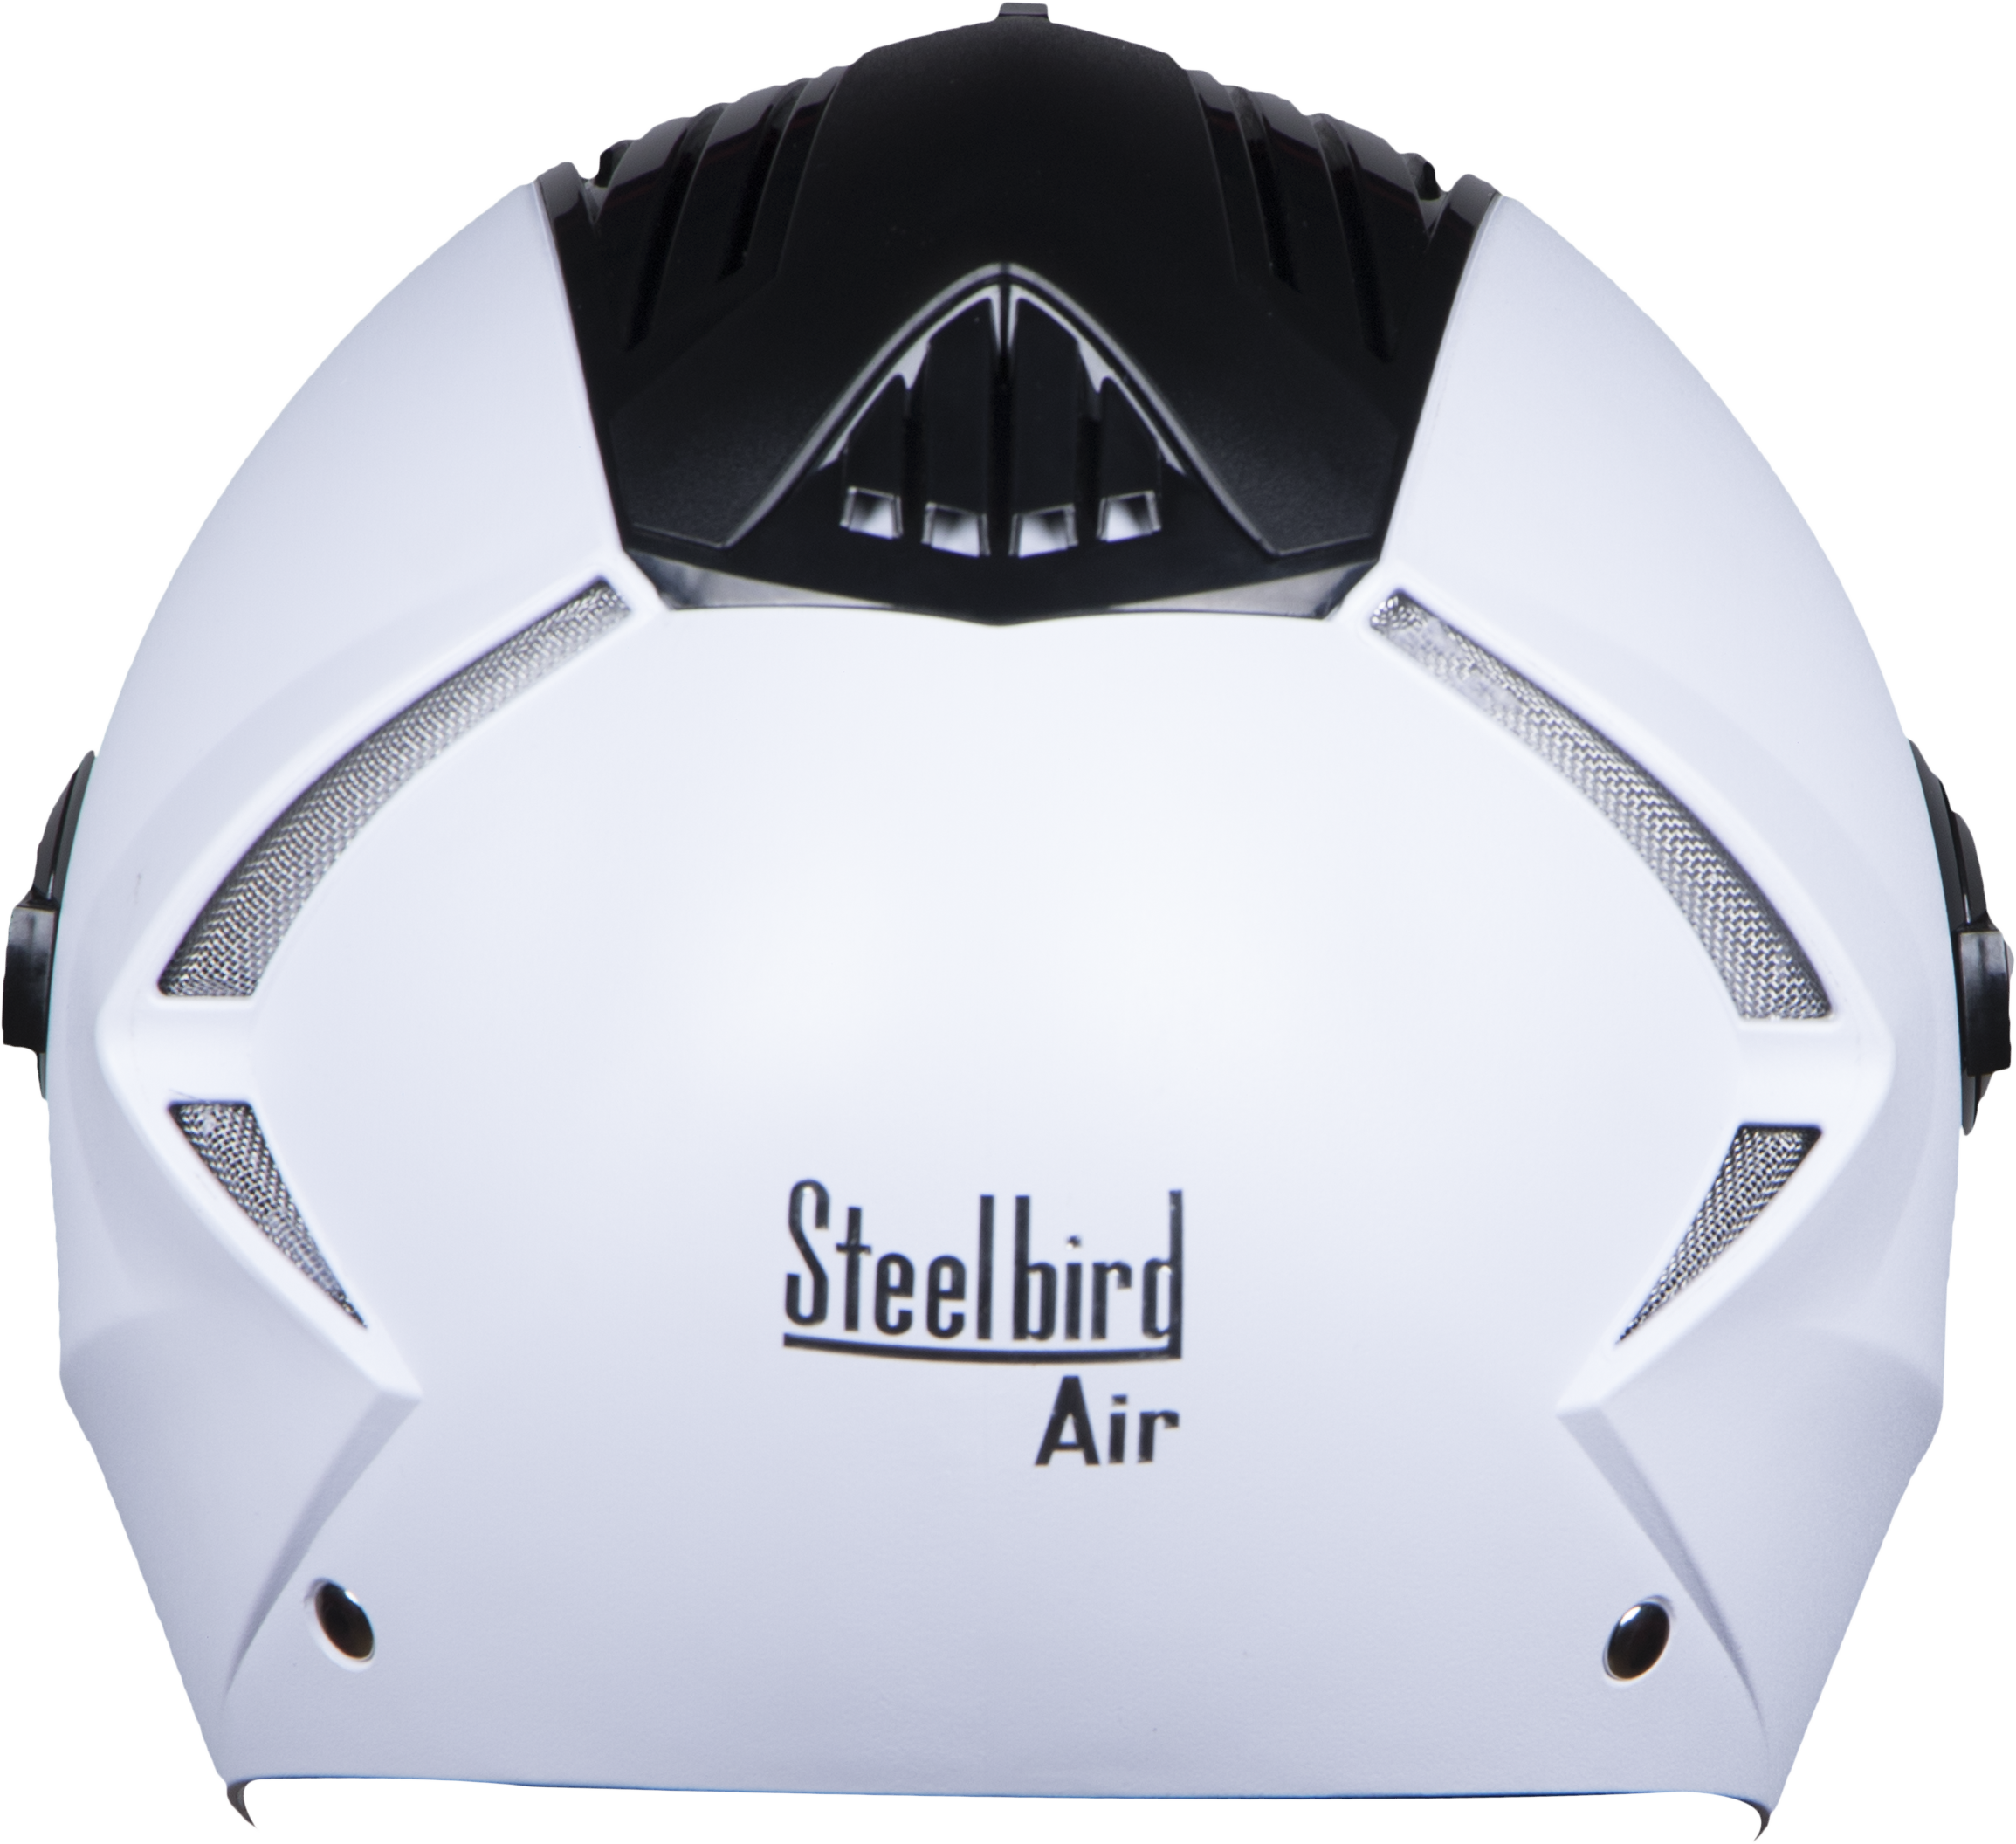 SBA-2 DASHING WHITE ( Fitted With Clear Visor Extra Rainbow Chrome Visor Free)